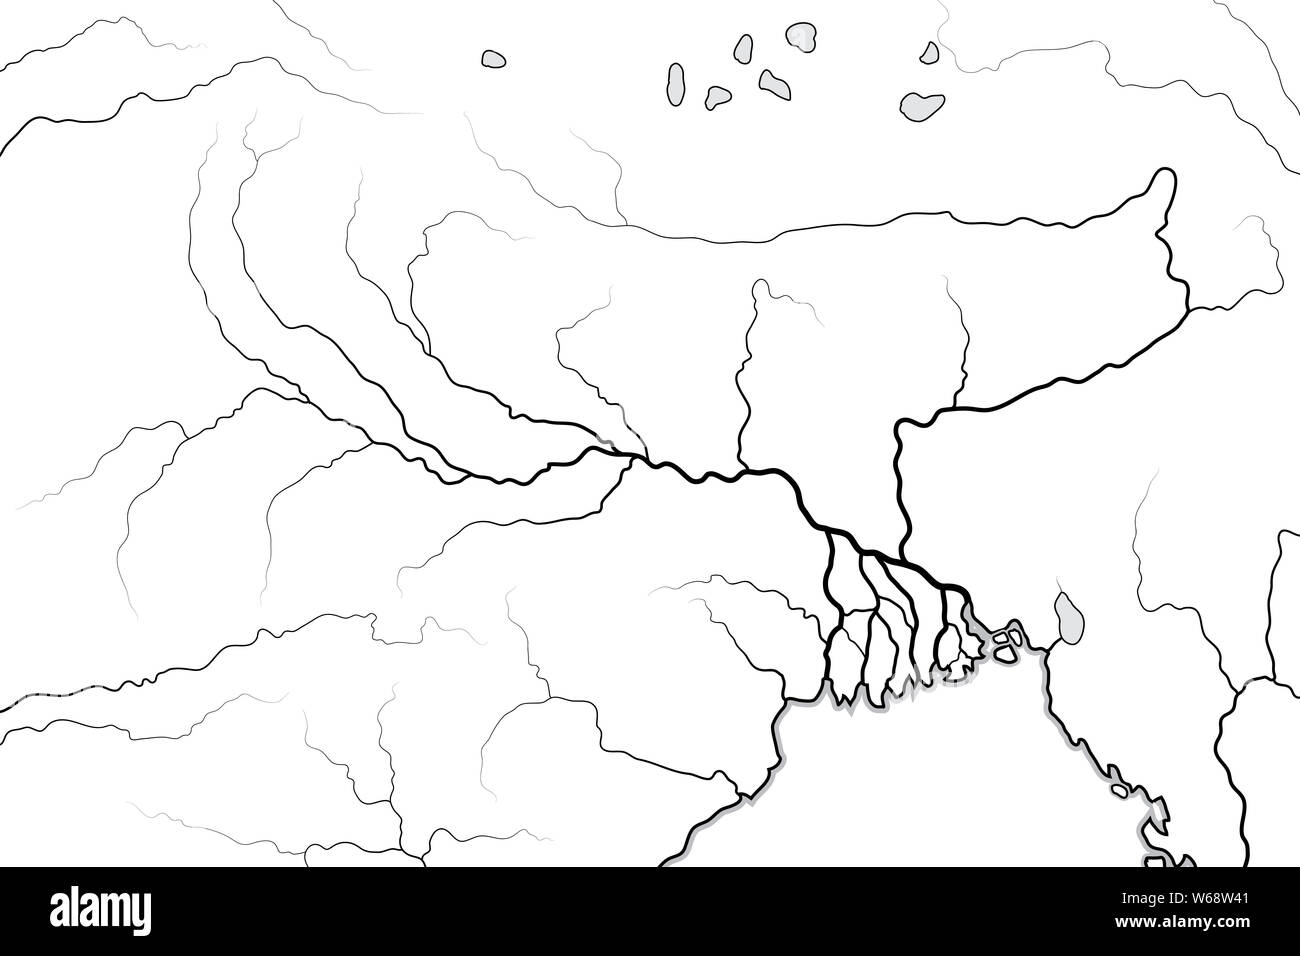 A schematic map of the Ganga River Basin showing the location and   Download Scientific Diagram